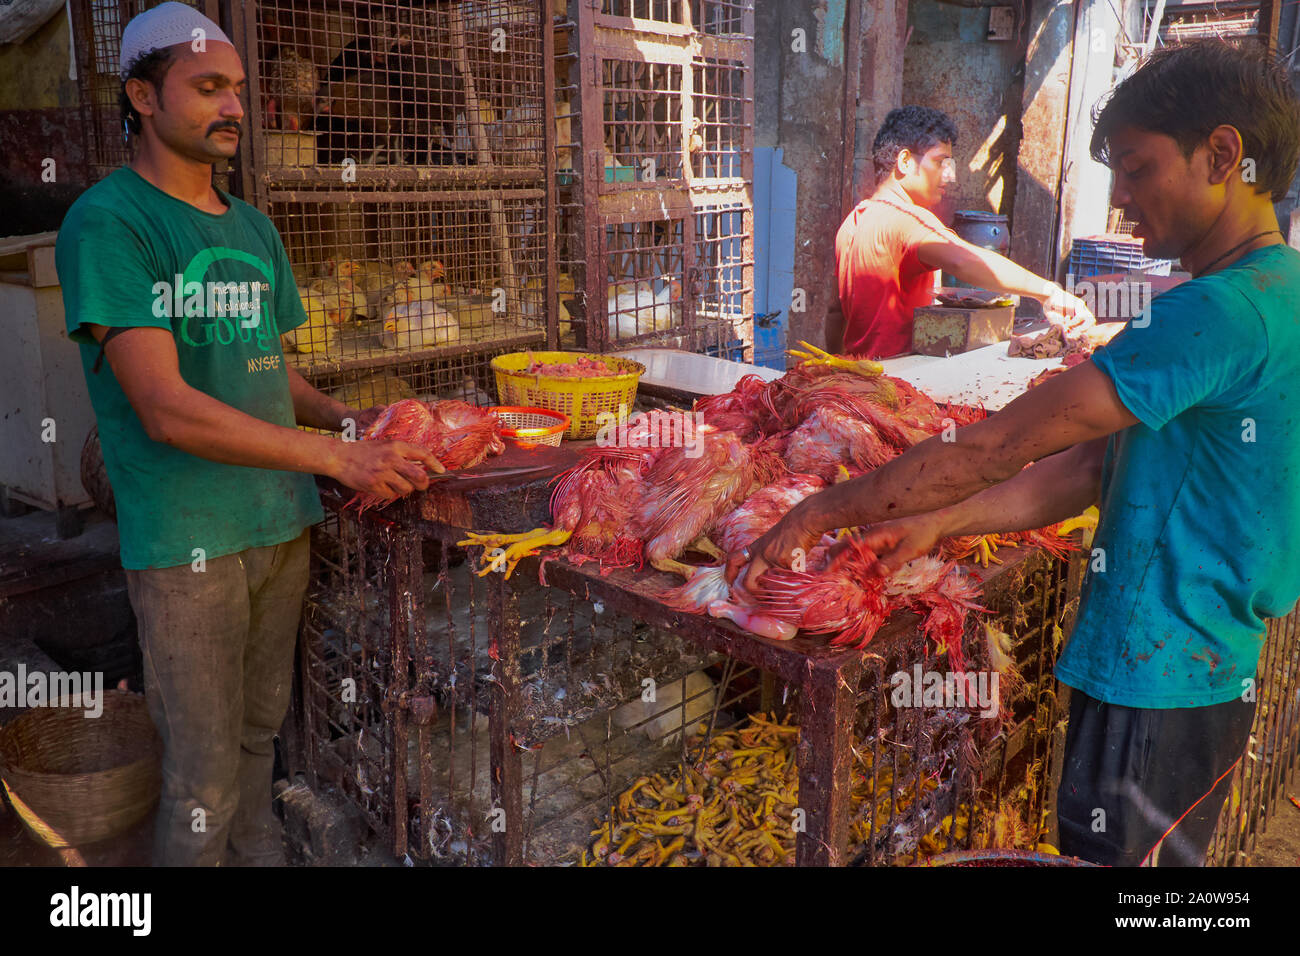 Muslim butchers in a slaughterhouse in Bhendi Bazaar area, Mumbai, India, plucking freshly slaughtered, blood-soaked chickens Stock Photo